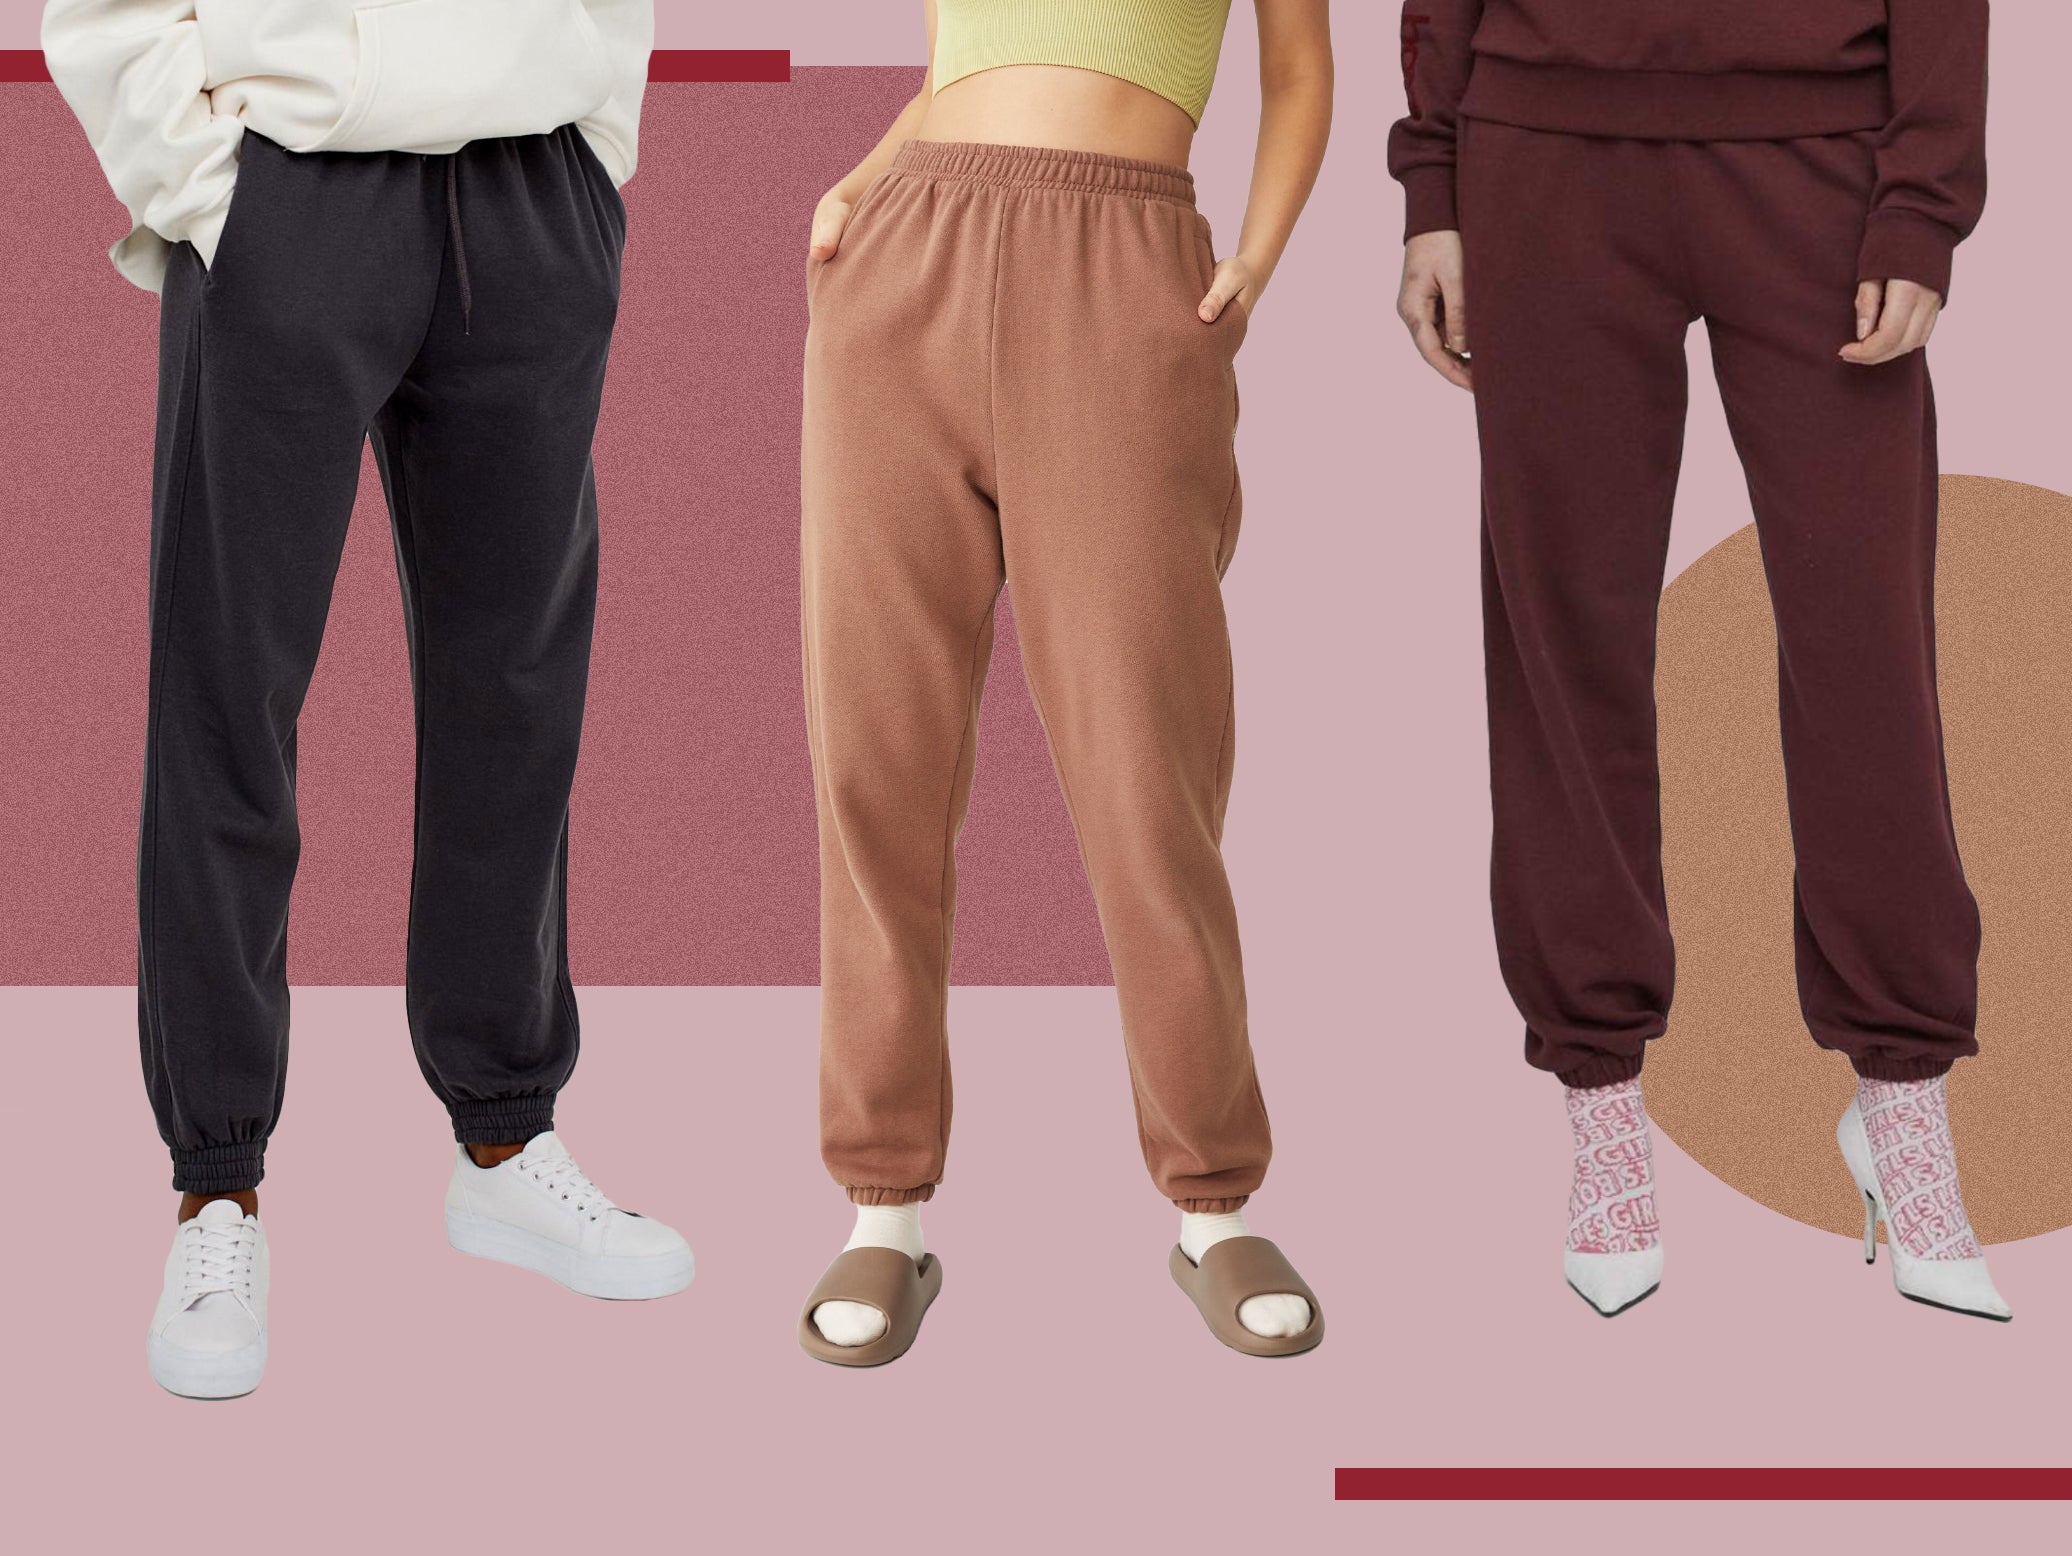 When It Comes to What to Wear With Sweatpants, Anything Goes